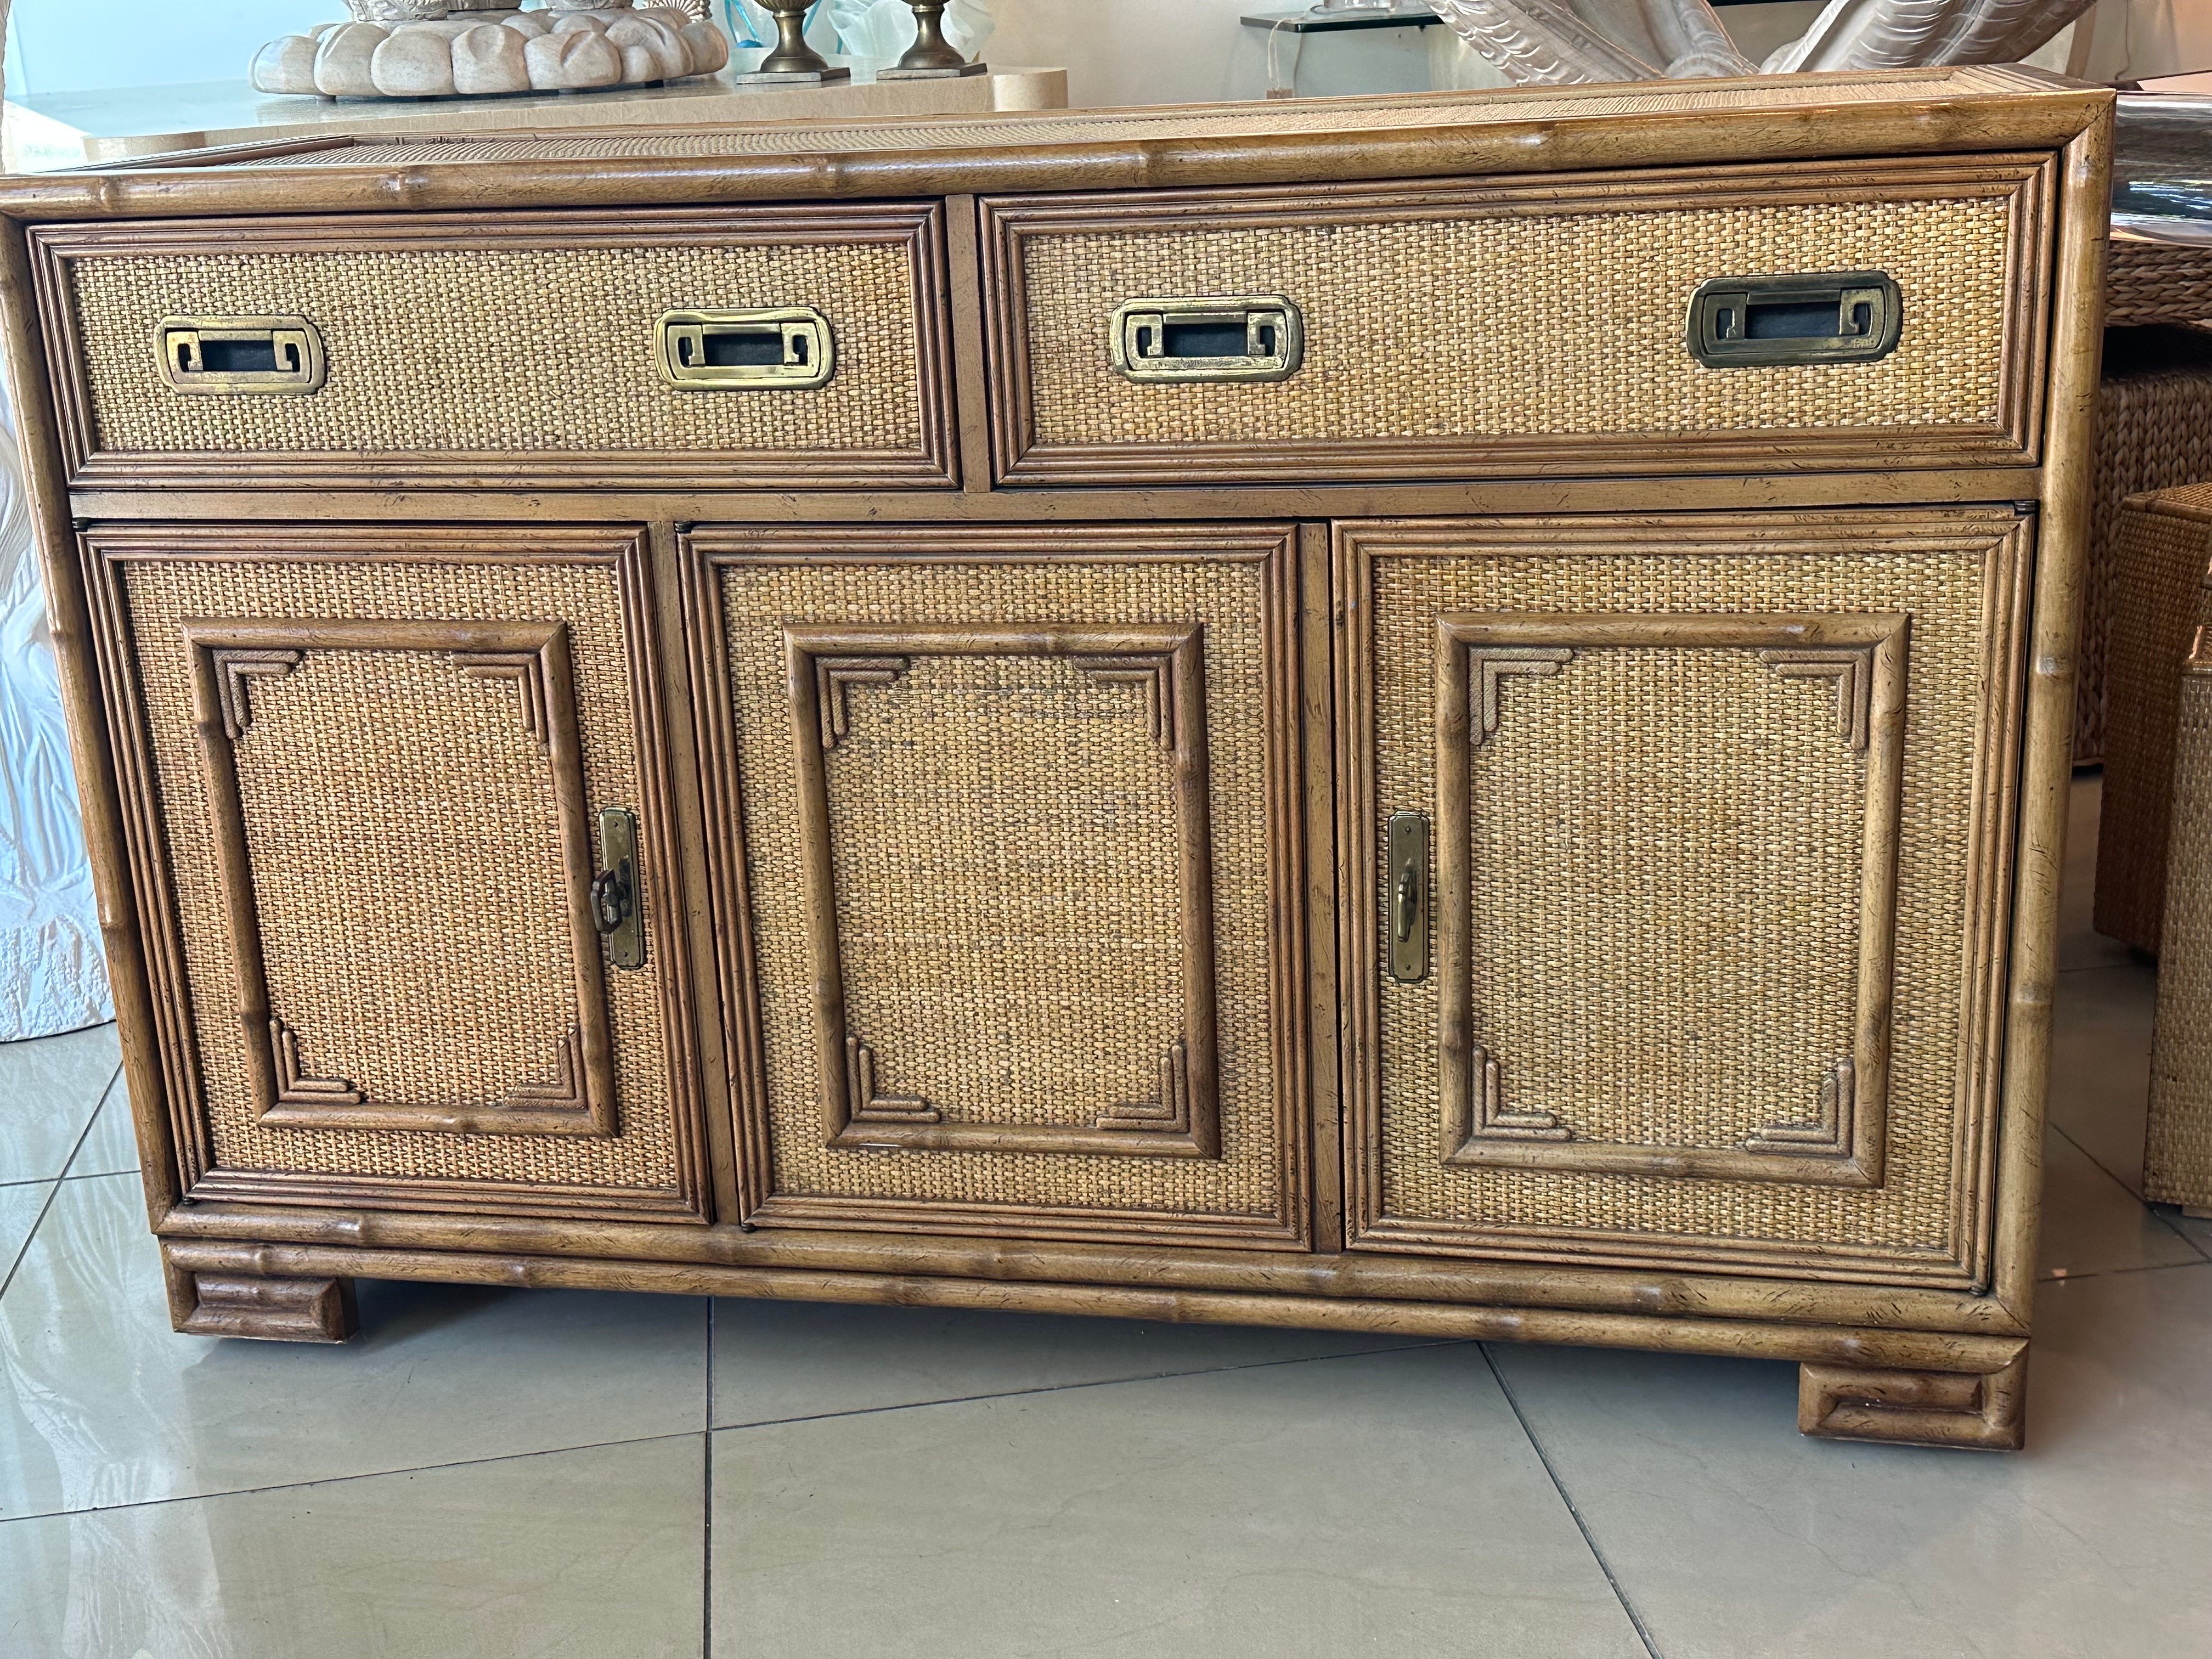 Beautiful vintage Drexel bamboo, wood, rattan, woven cane wicker, brass cabinet credenza buffet dresser. Comes with inset glass top. 2 drawers, 3 doors. One side has a shelf. There is no damage or issues to this well taken care of piece. Dimensions: